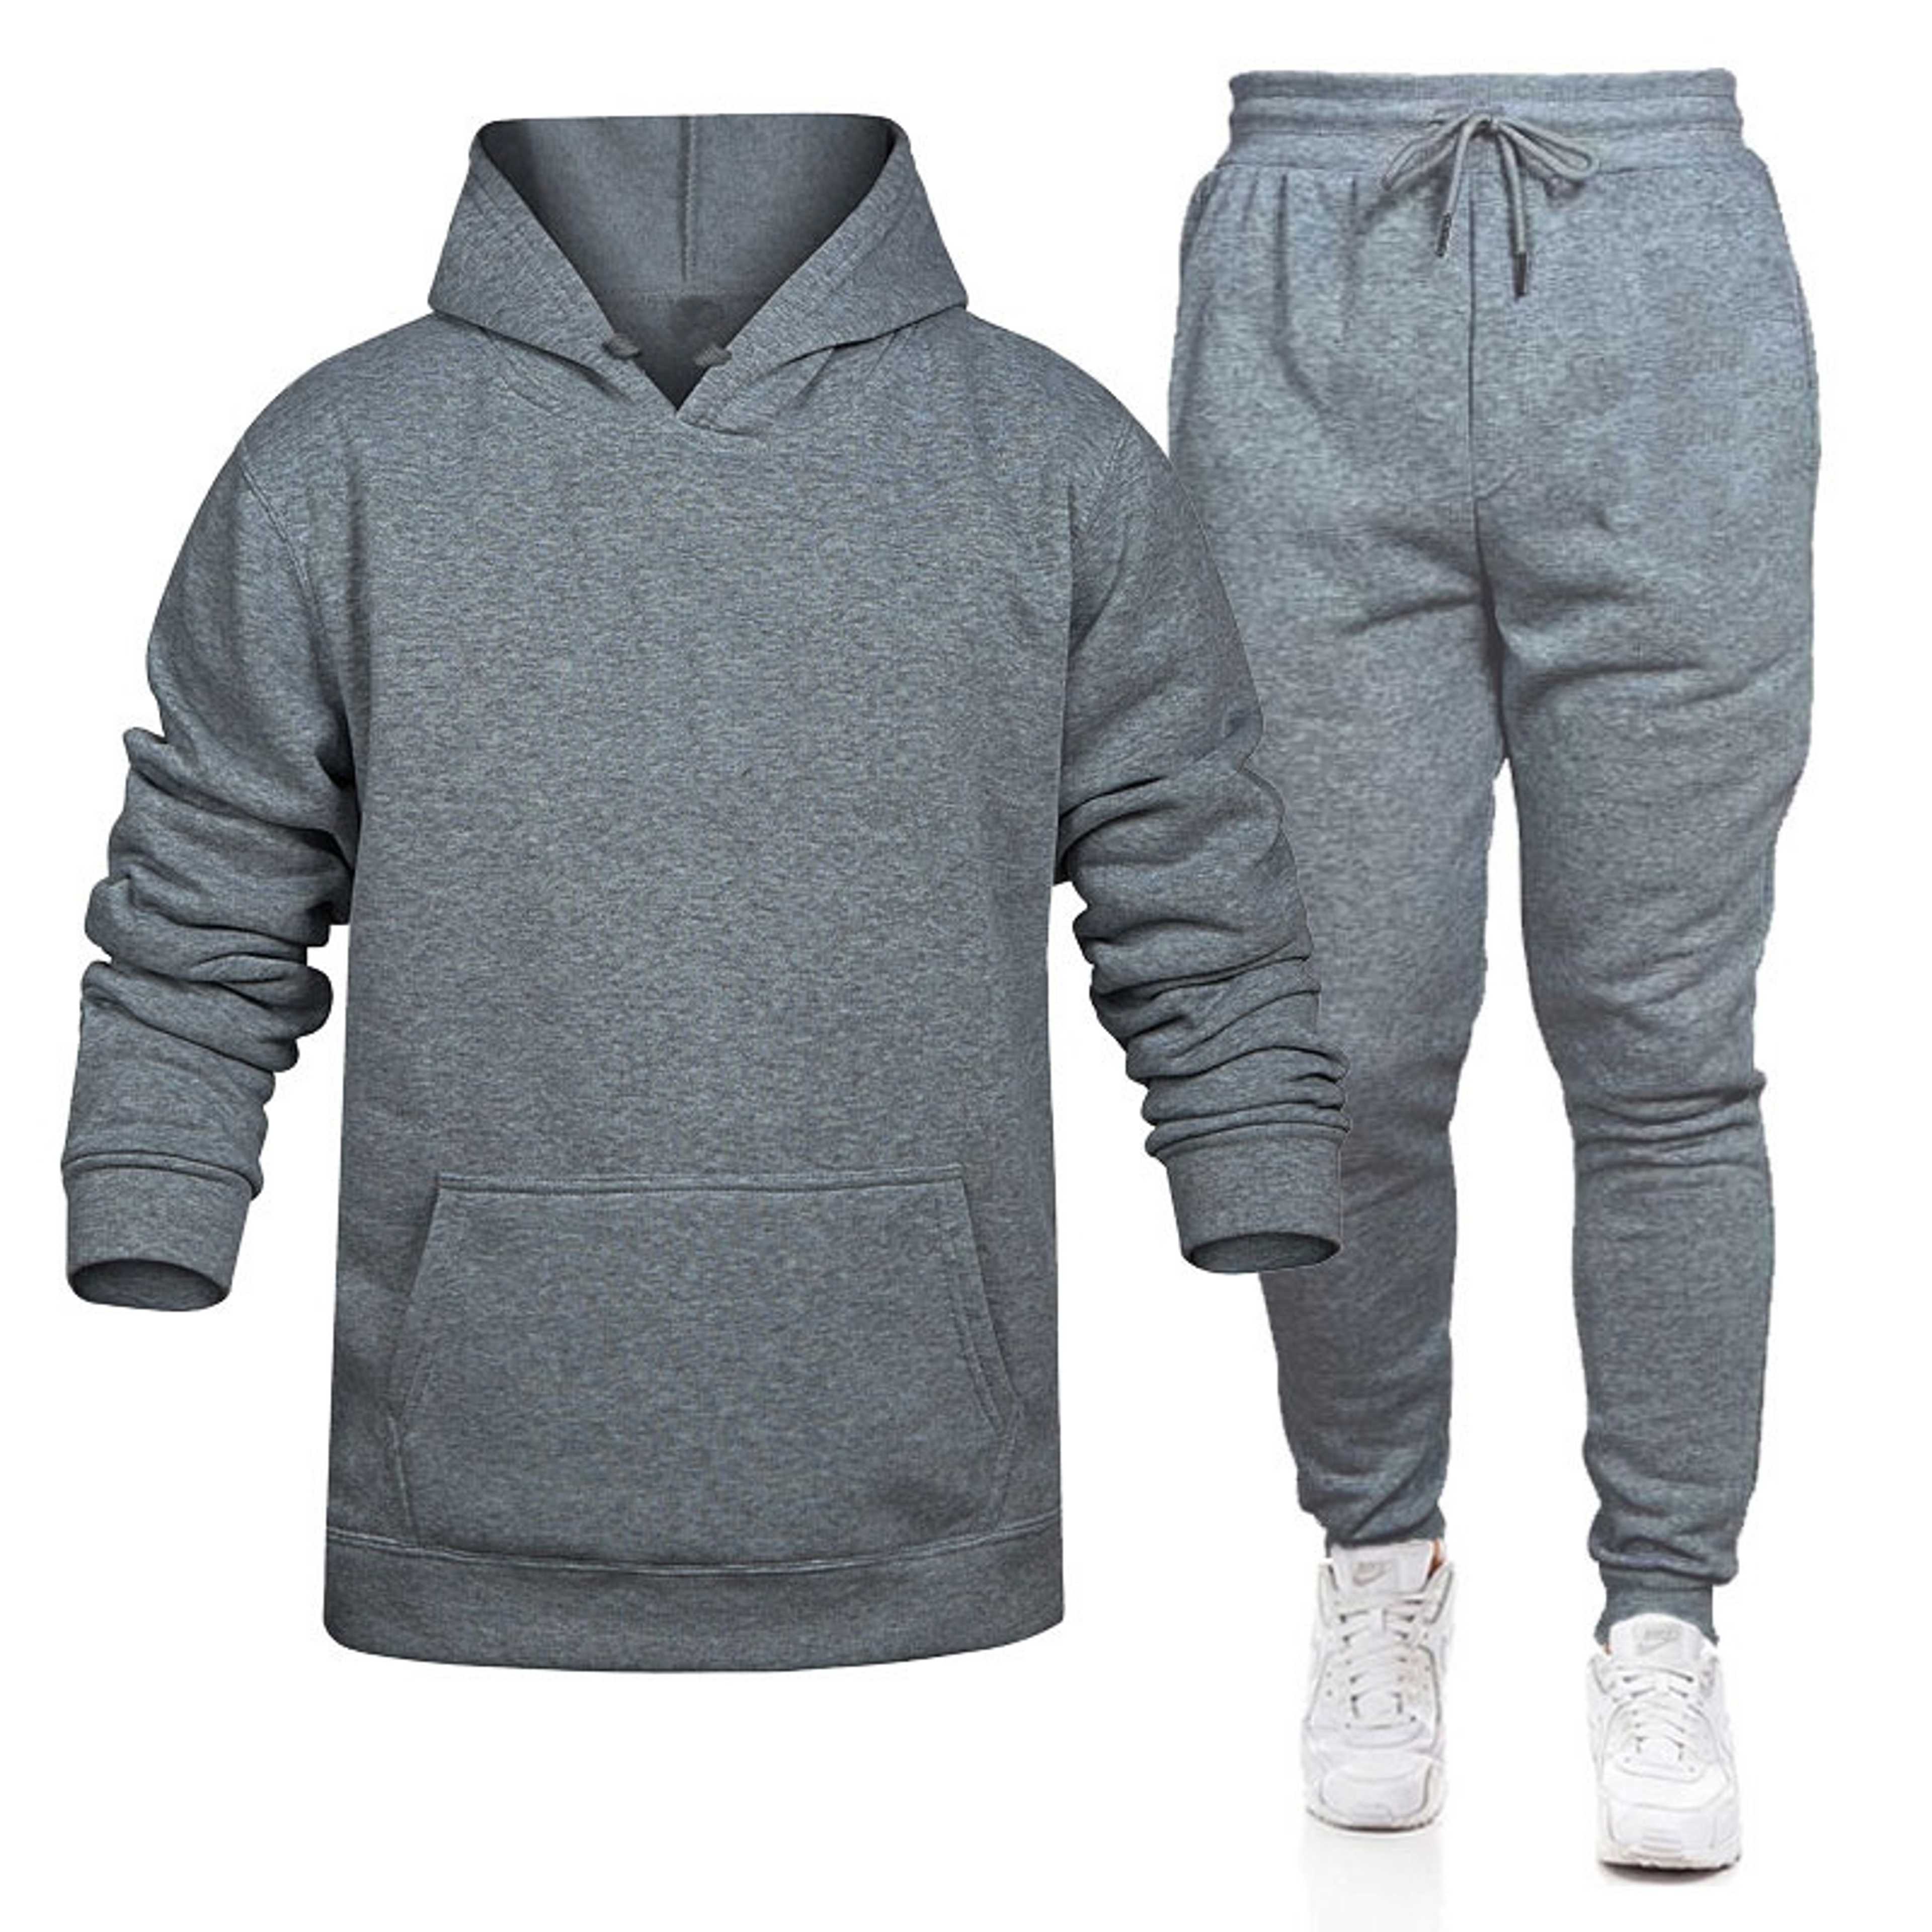 Solid Color Long Sleeve Winter Hooded Wear and Pants Comfortable Casual Style Sweater Men's Wear